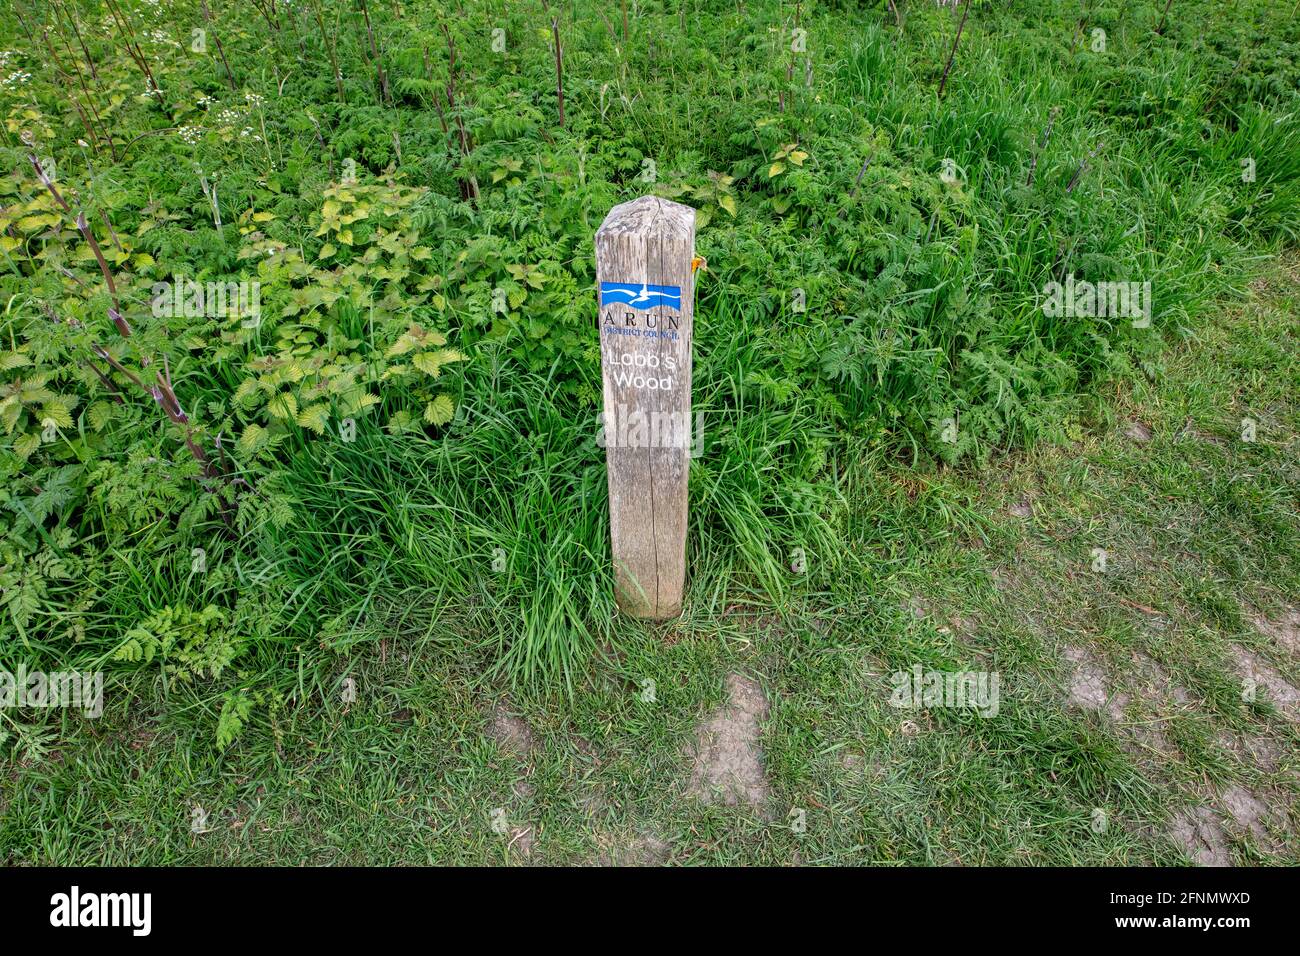 Wooden post marking Lobb's Wood, Littlehampton, West Sussex; a pocket park full of cow parsley and maintained by Arun District Council Stock Photo